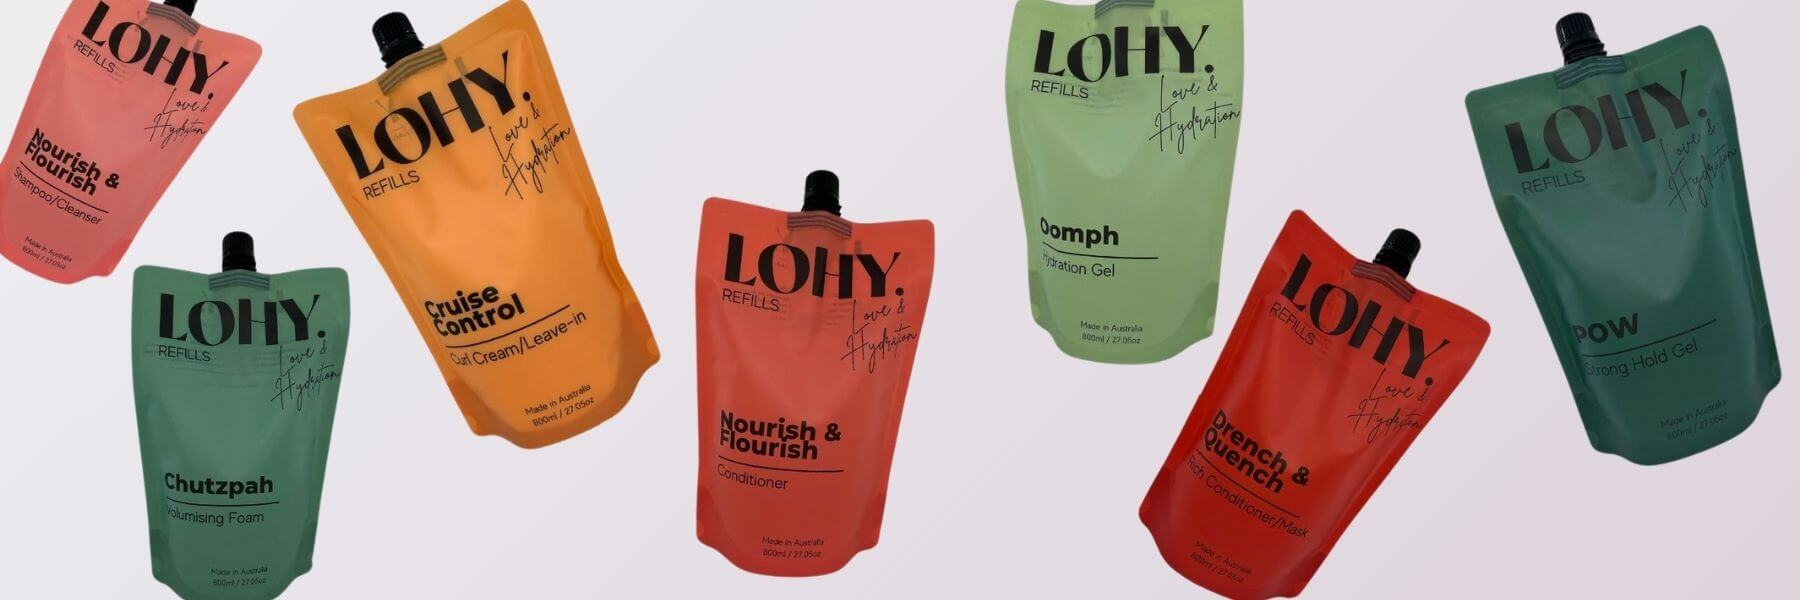 800ml spout pouches of LOHY's curly hair products